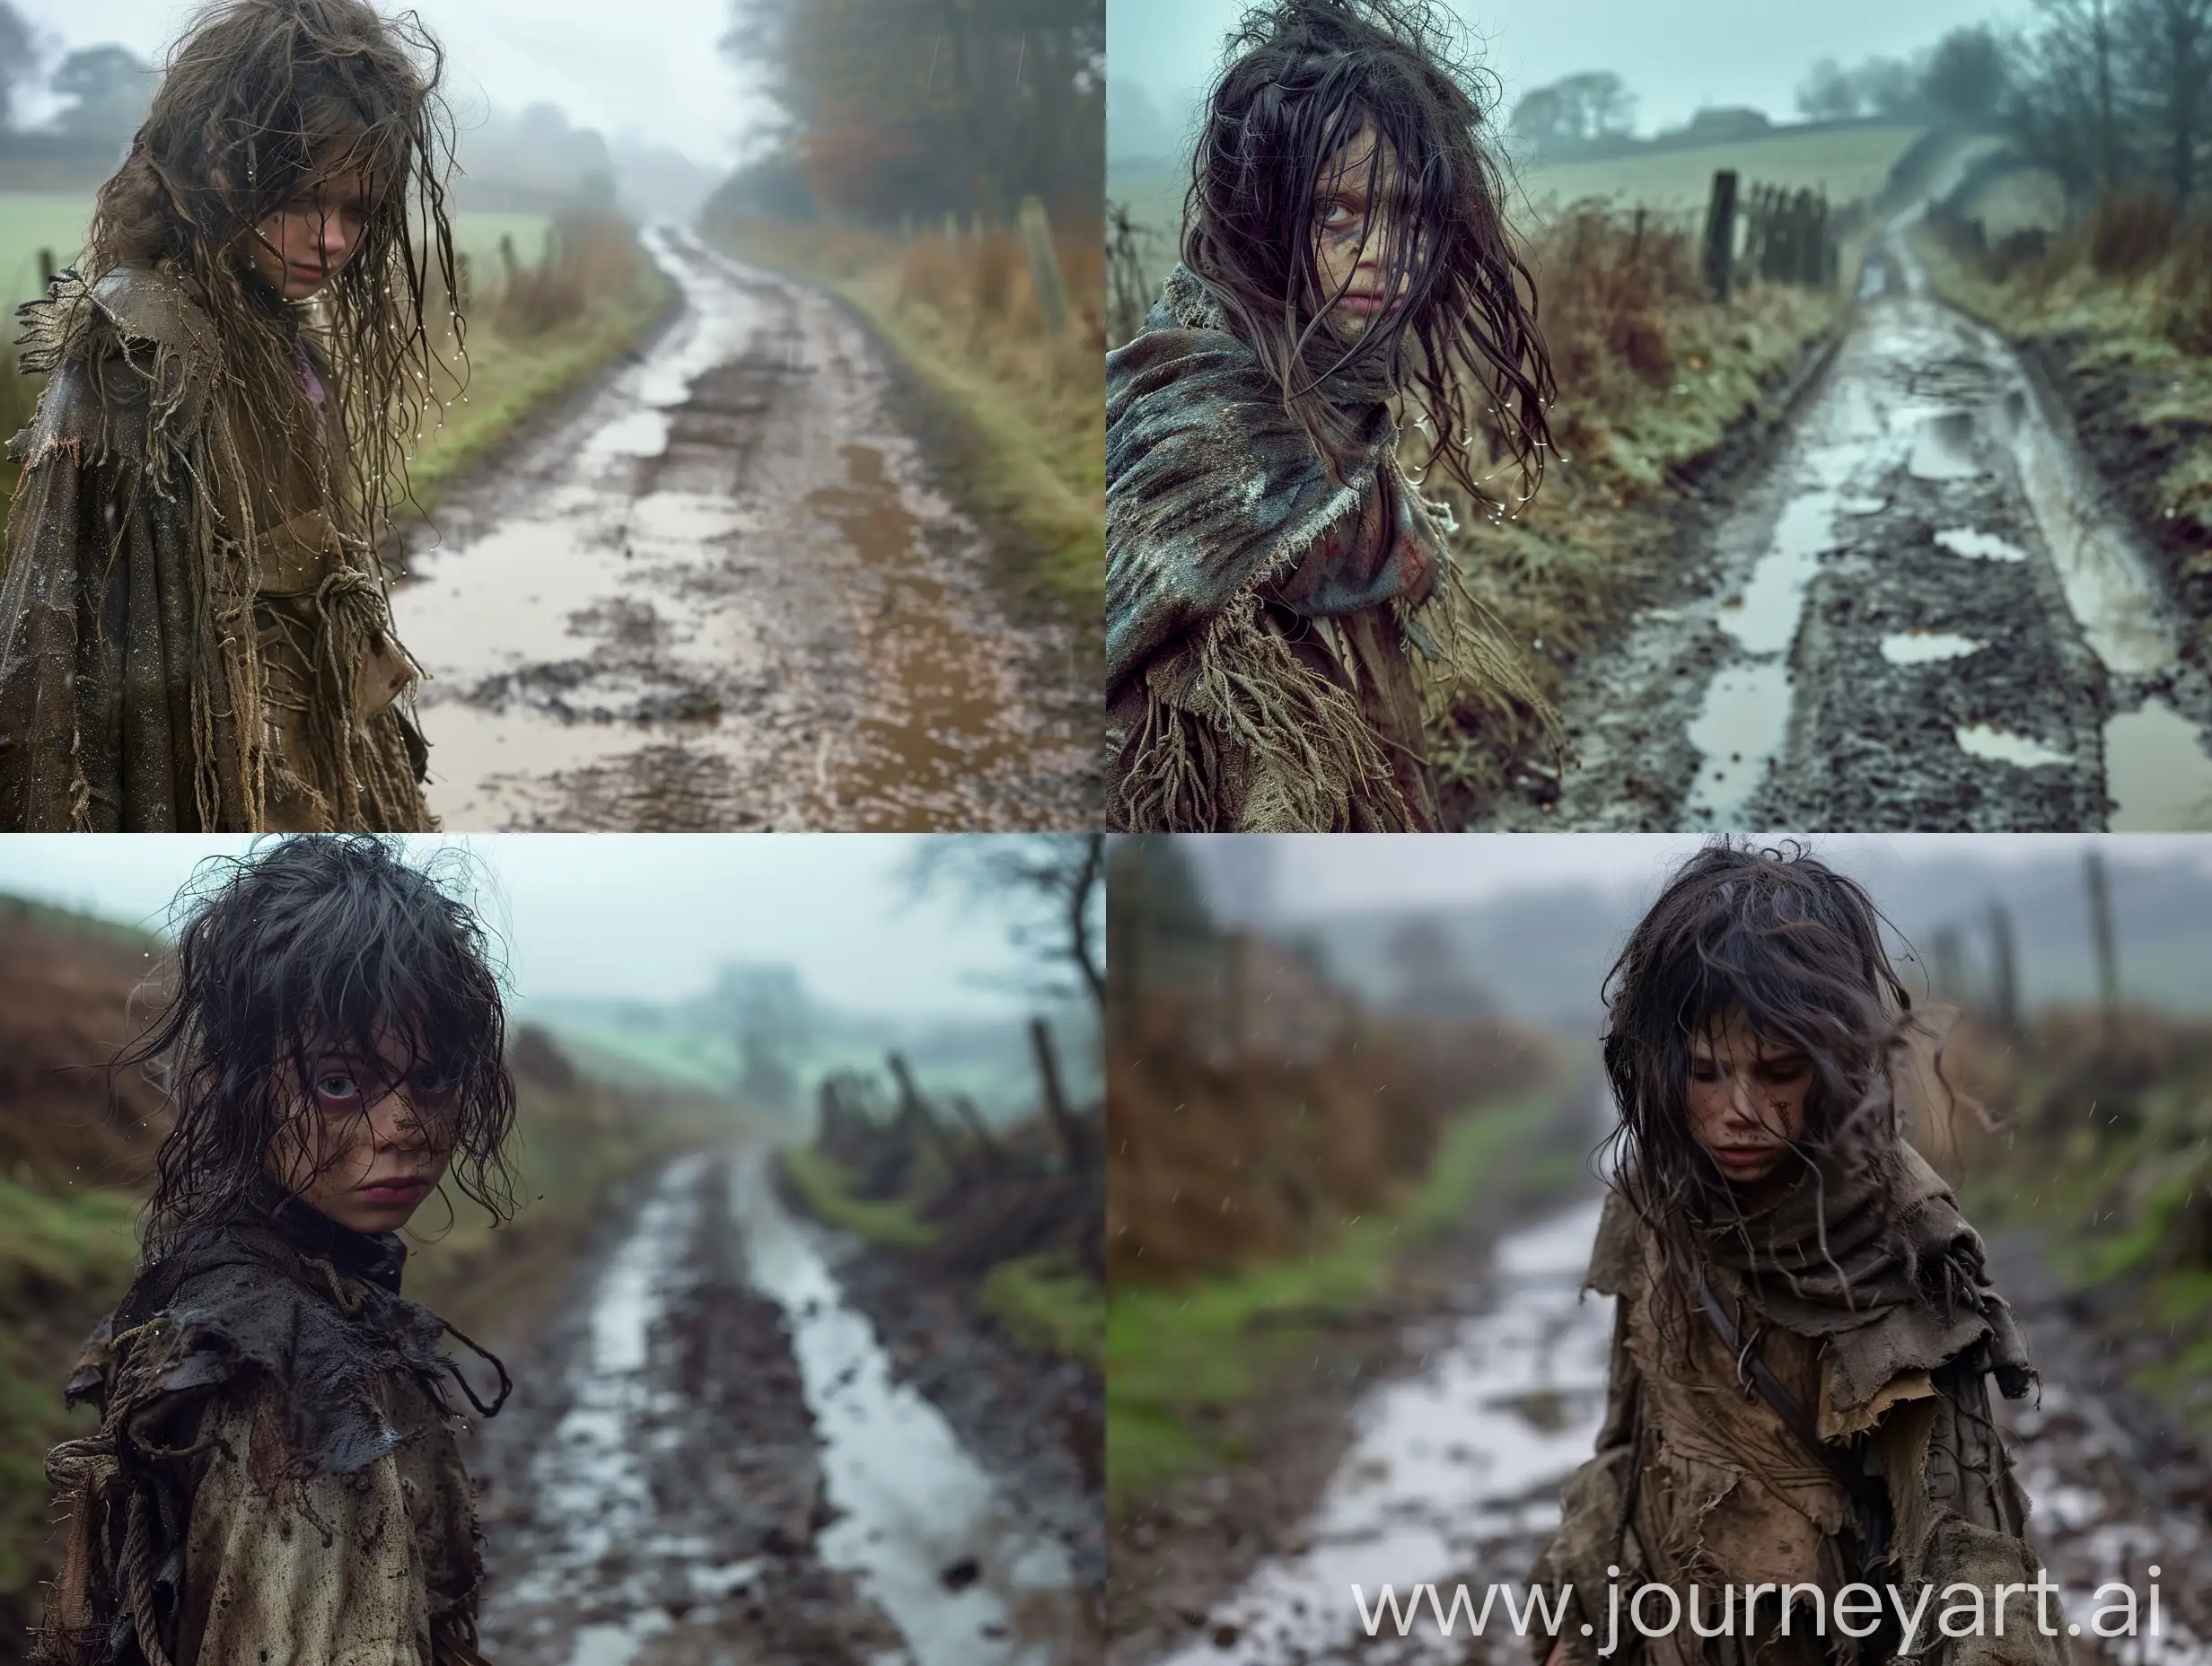 medieval horror film, movie still of young witch with matted hair wearing grimy tattered rags, walking down the muddy dirt road with puddles, medium close up. Bleak and grim november countryside landscape in background, Scotch mist, drizzle, chilly weather. Overcast lighting. Dutch angle, shot on Arri Alexa, 50mm lens. In style of Pre-Raphaelites.